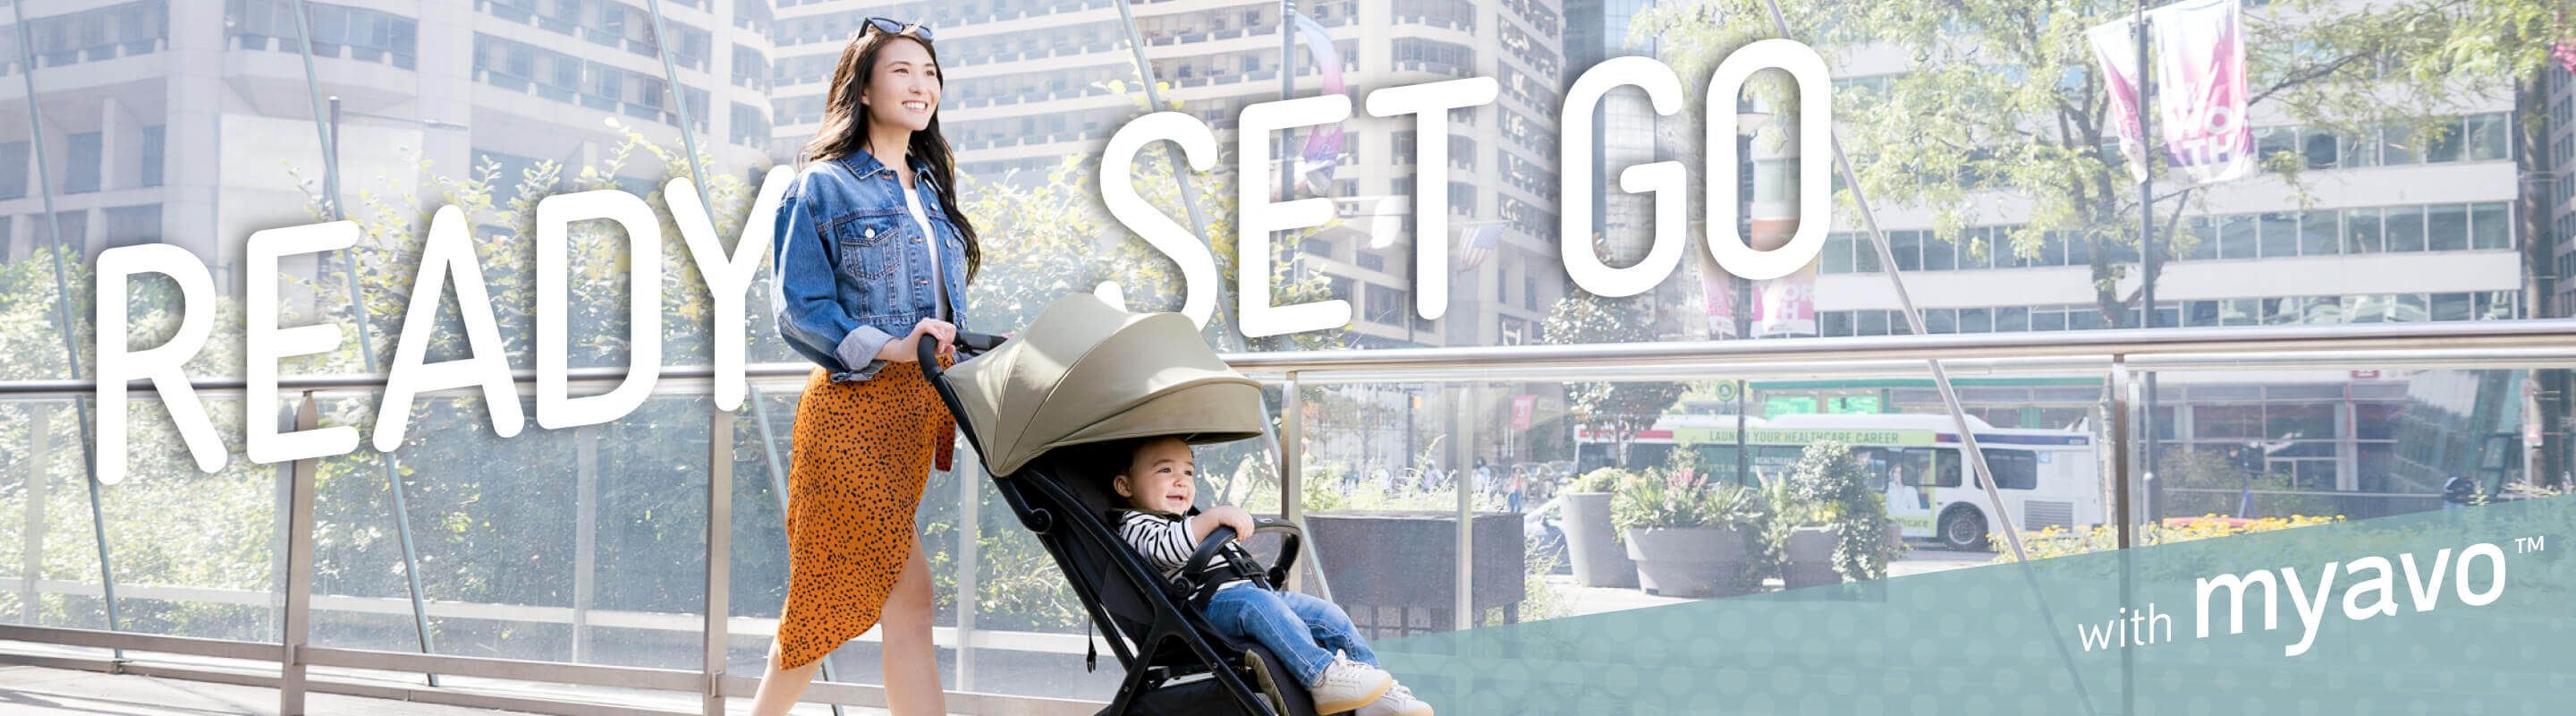 Mum and baby walking through the city in Graco Myavo with Ready, Set, Go text. 